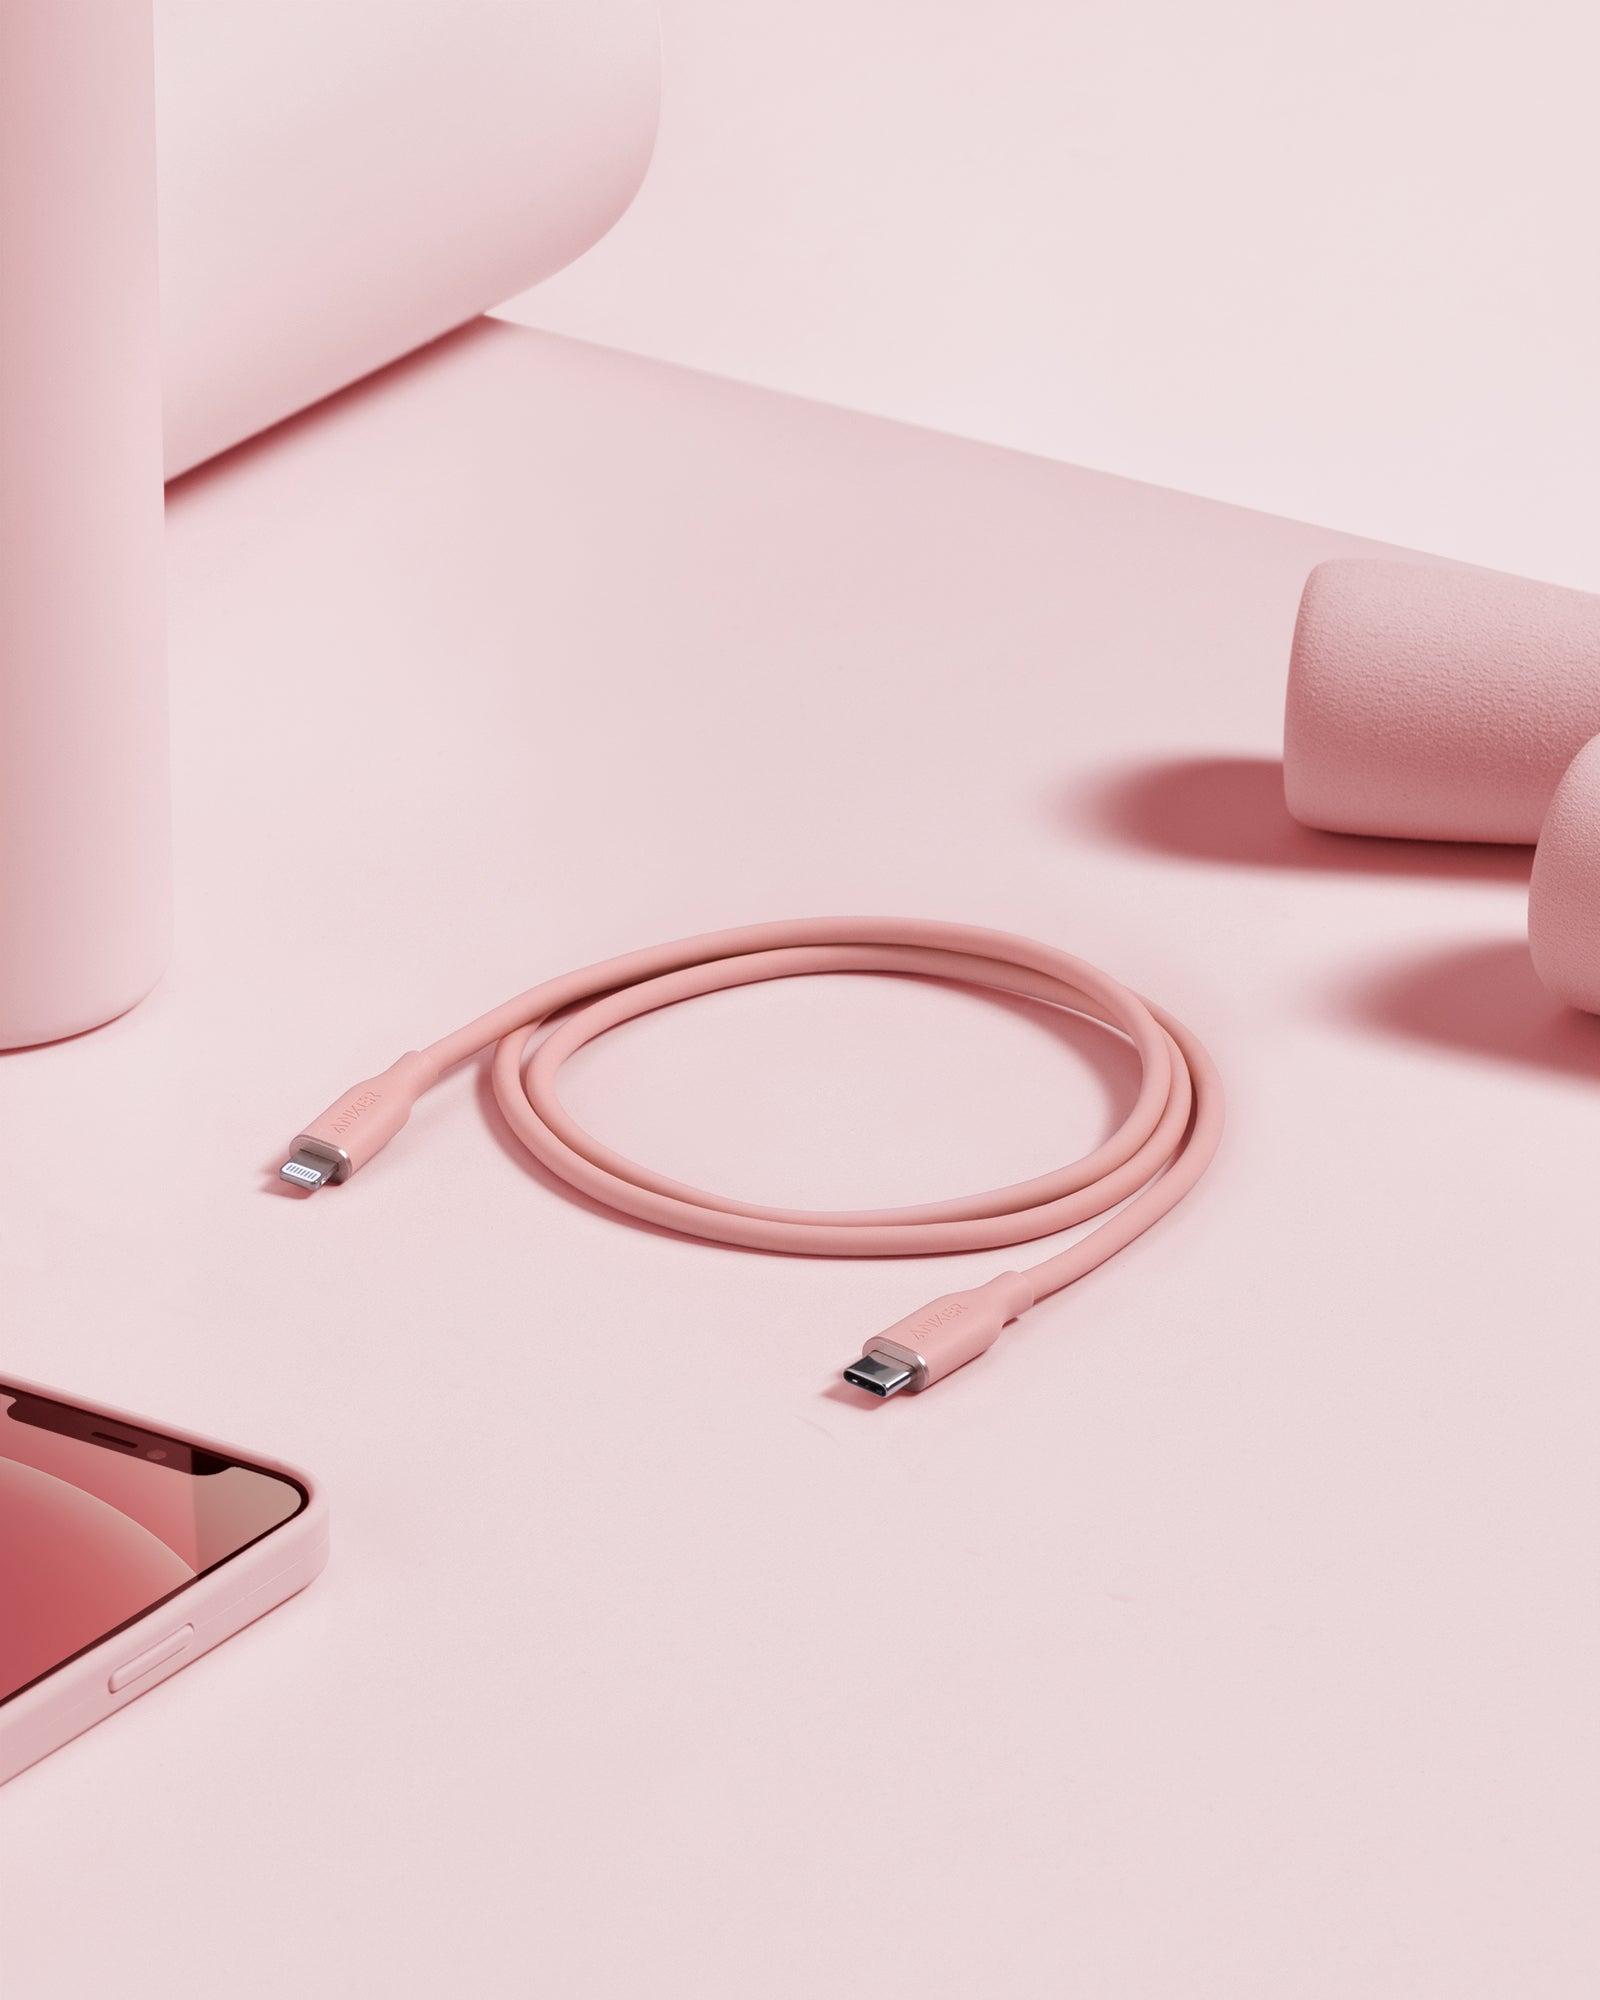 Anker® 641 PowerLine III Flow A8662051 USB-C to Lightning MFi Certified 0.9m Cable - Coral Pink